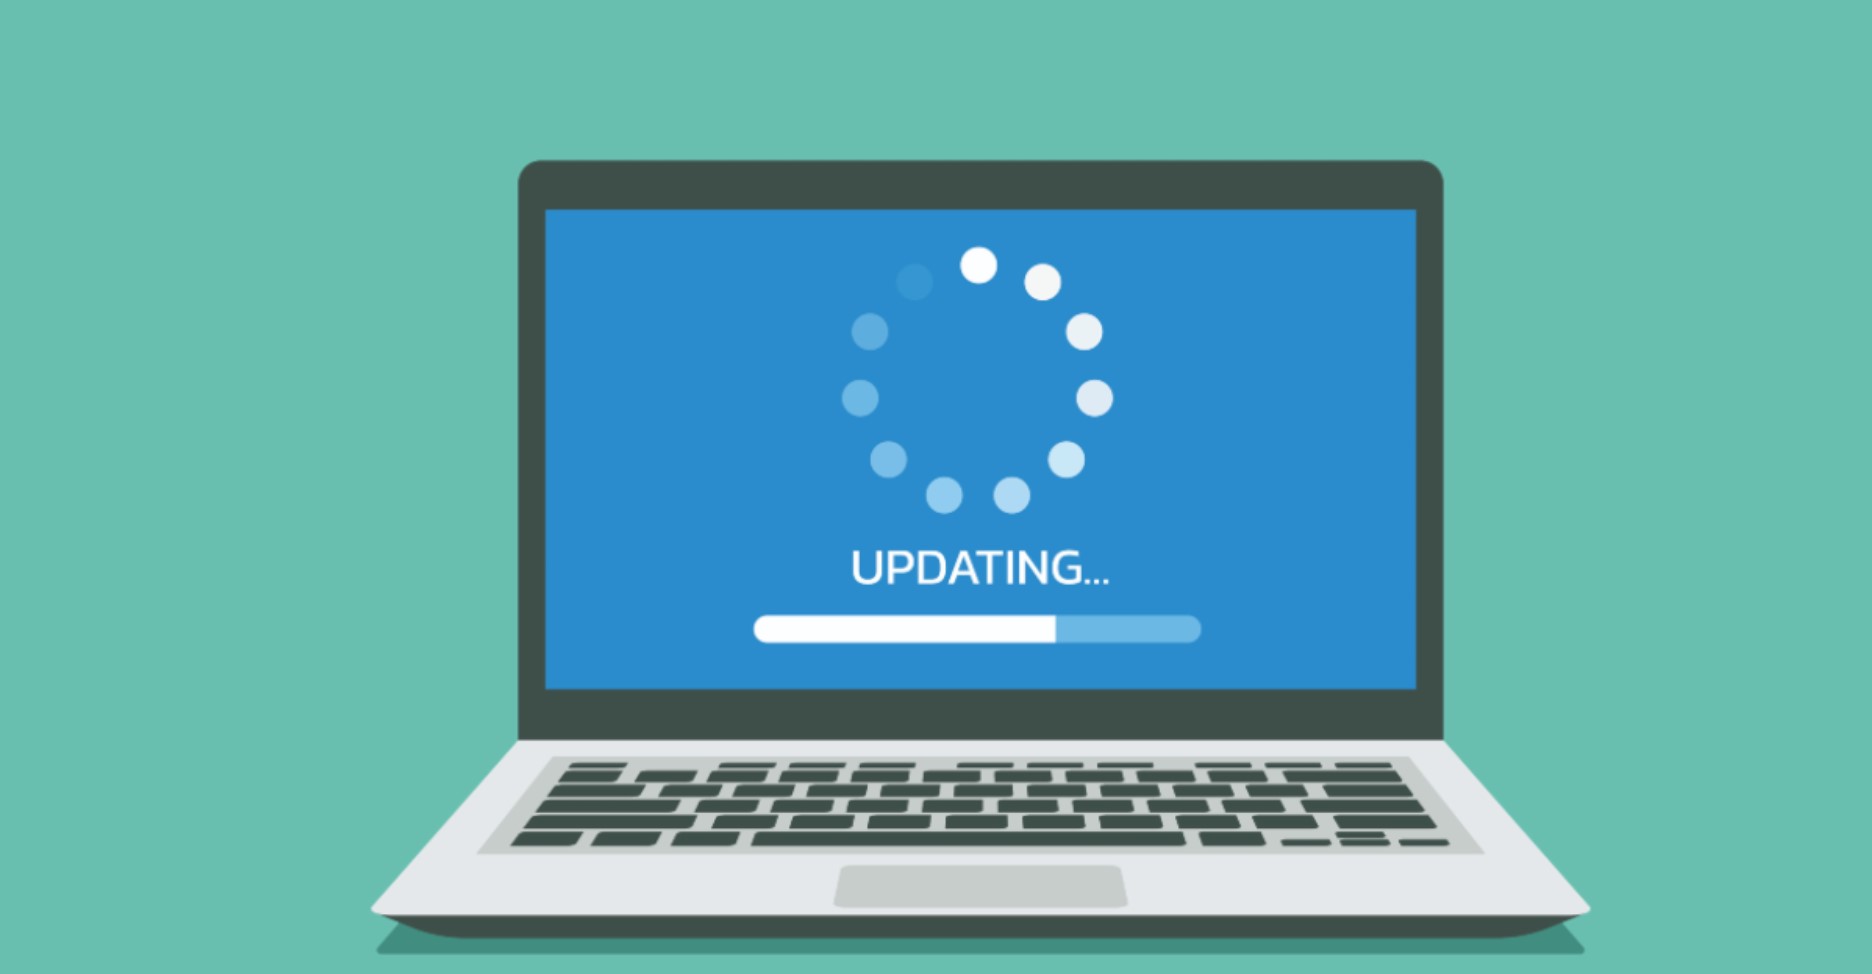 Windows Update: Managing and Troubleshooting System Updates